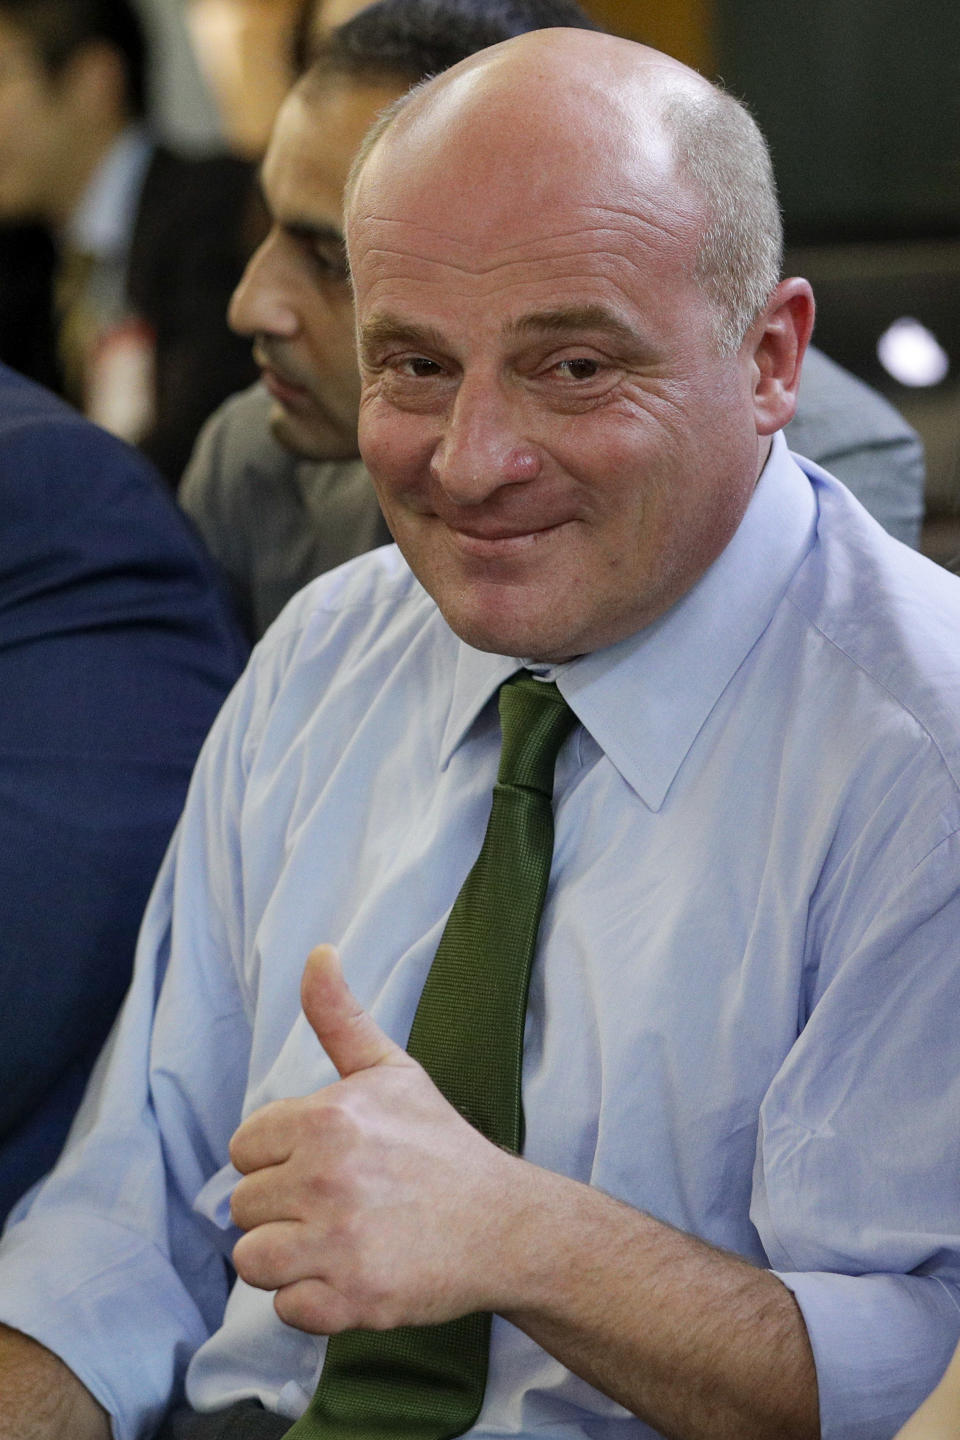 David Kirvalidze from Georgia, one of the candidates for the Director-General position of the FAO (UN Food and Agriculture Organization), gives the thumbs up as he attends a plenary meeting of the 41st Session of the Conference, at the FAO headquarters in Rome, Saturday, June 22, 2019. The new FAO Director-General will be voted on Sunday. (AP Photo/Andrew Medichini)